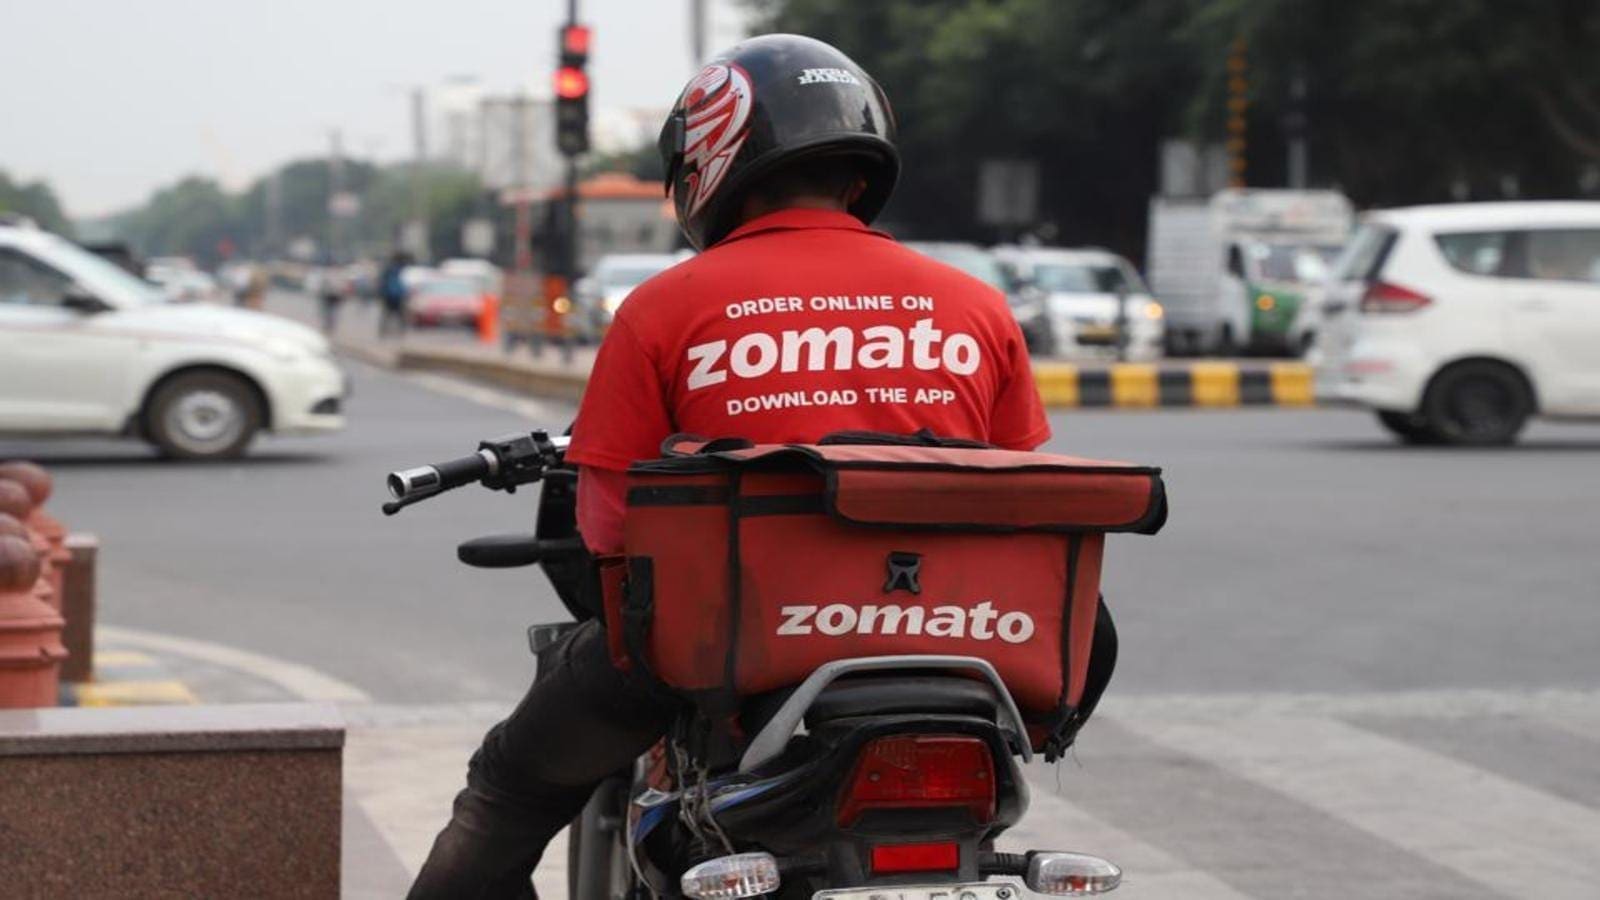 India’s food service industry, delivery platforms to take a hit as new restrictions hamper movement